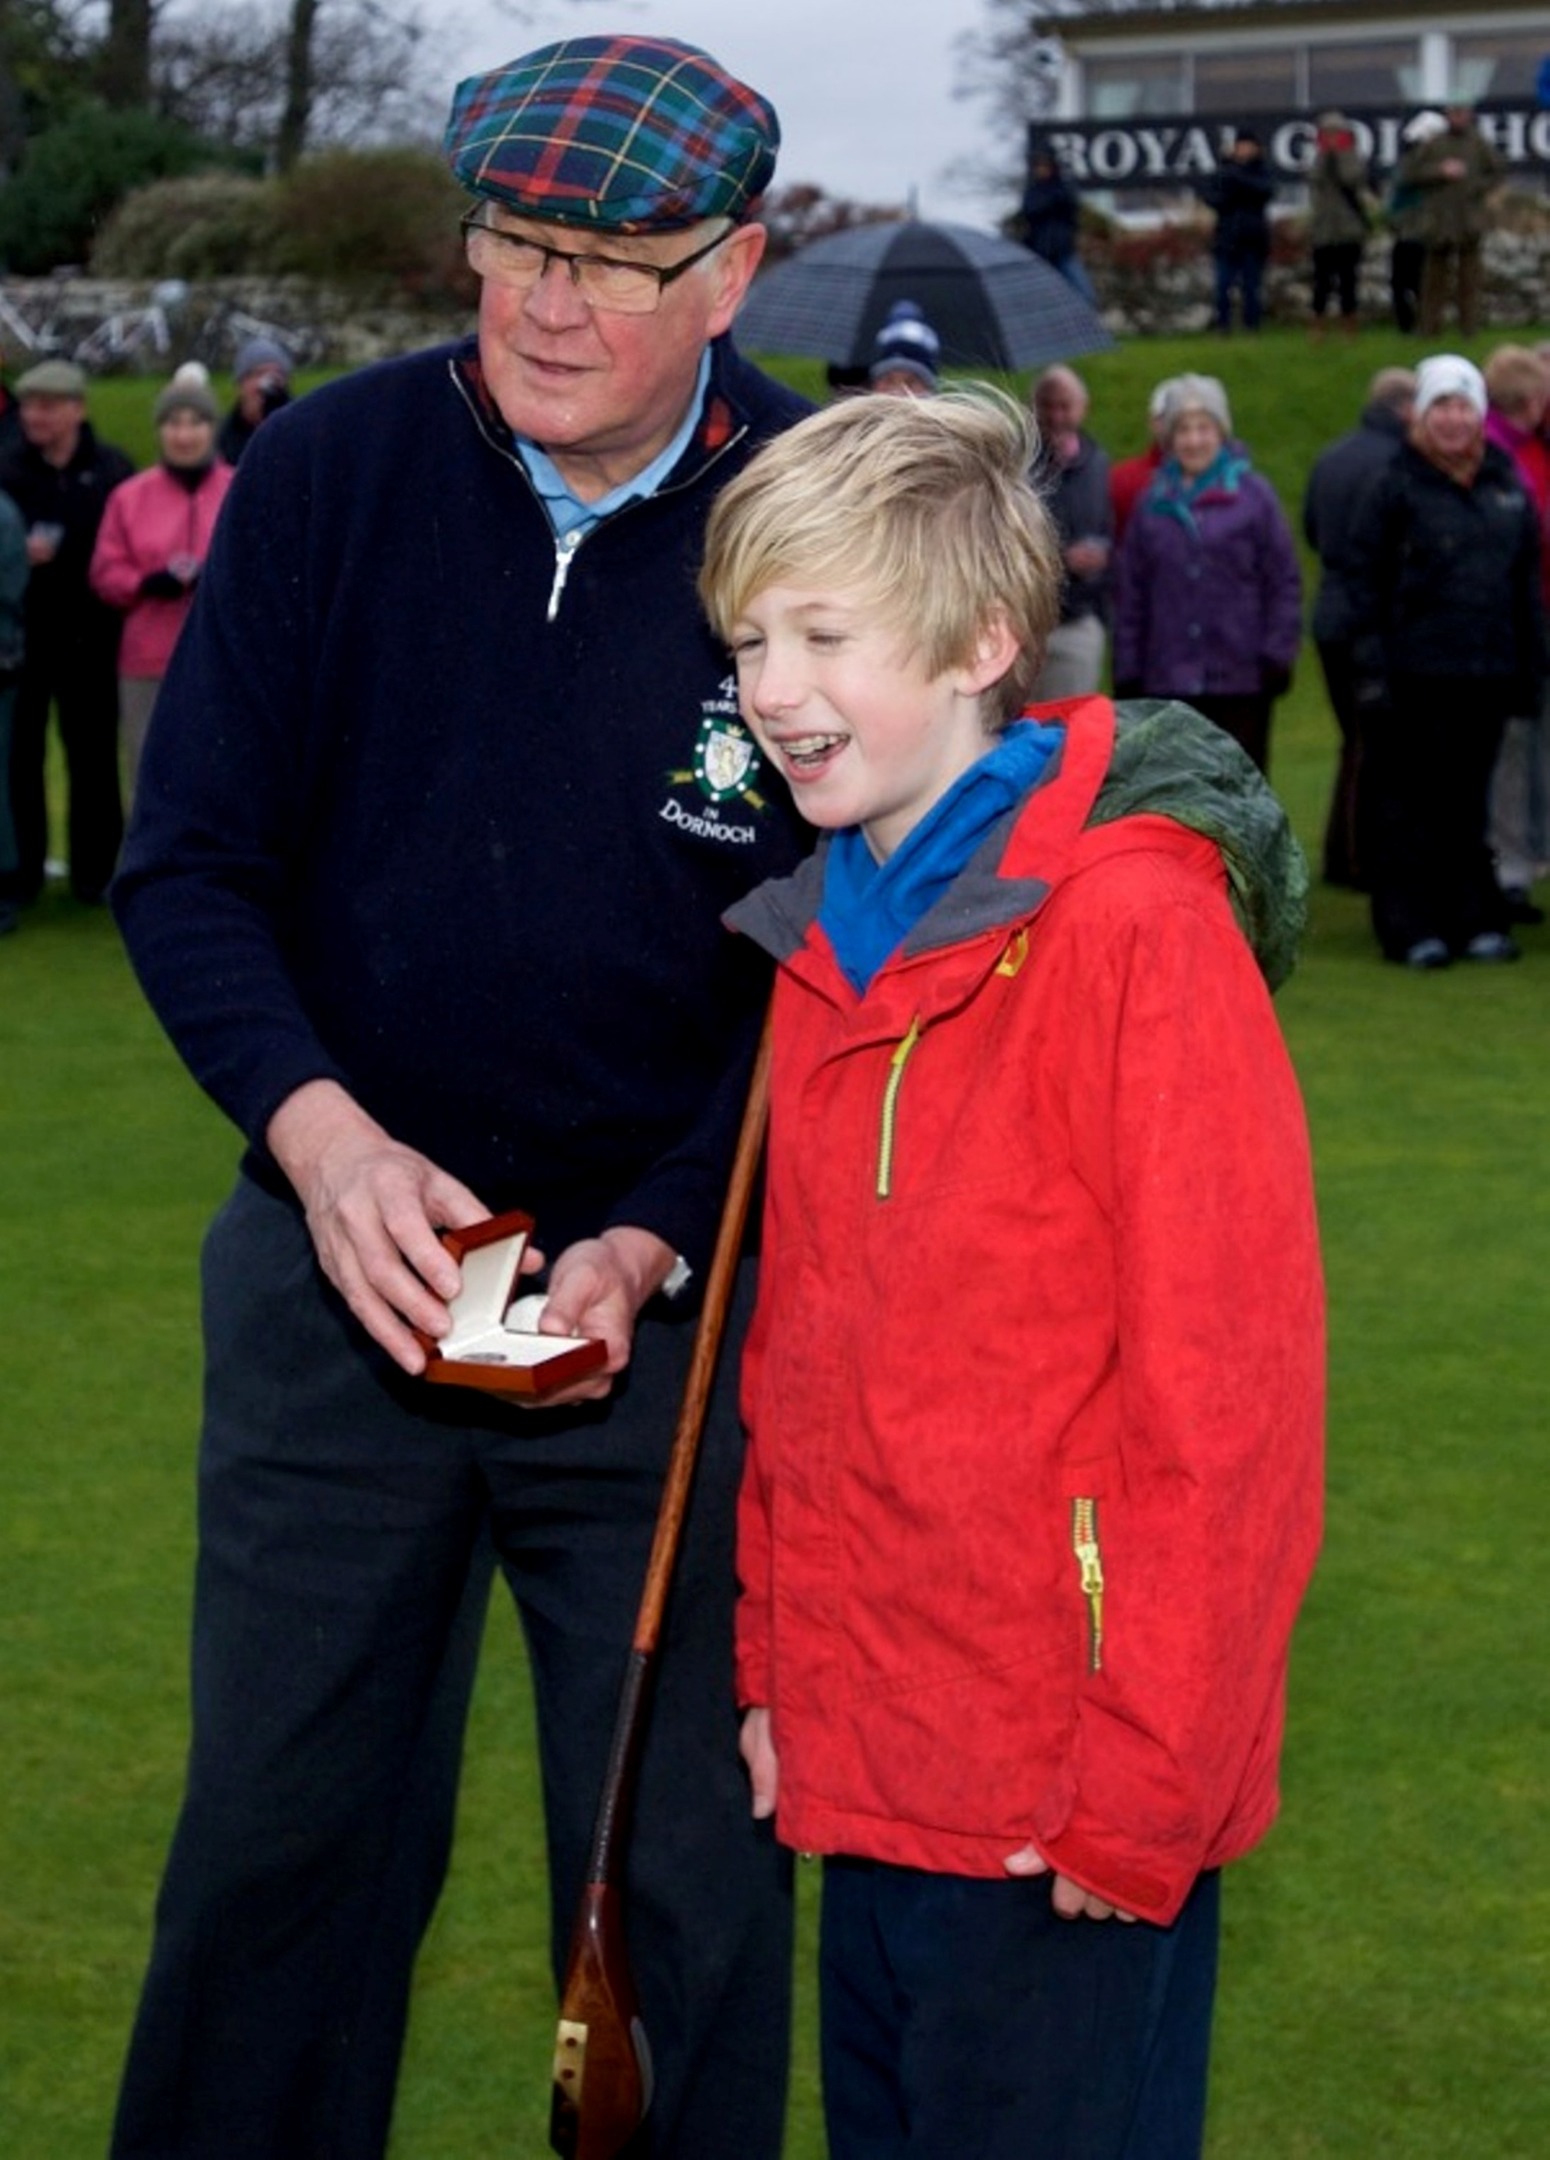 Royal Dornoch Captain Jim Seatter and 12-year-old Cameron Welsh